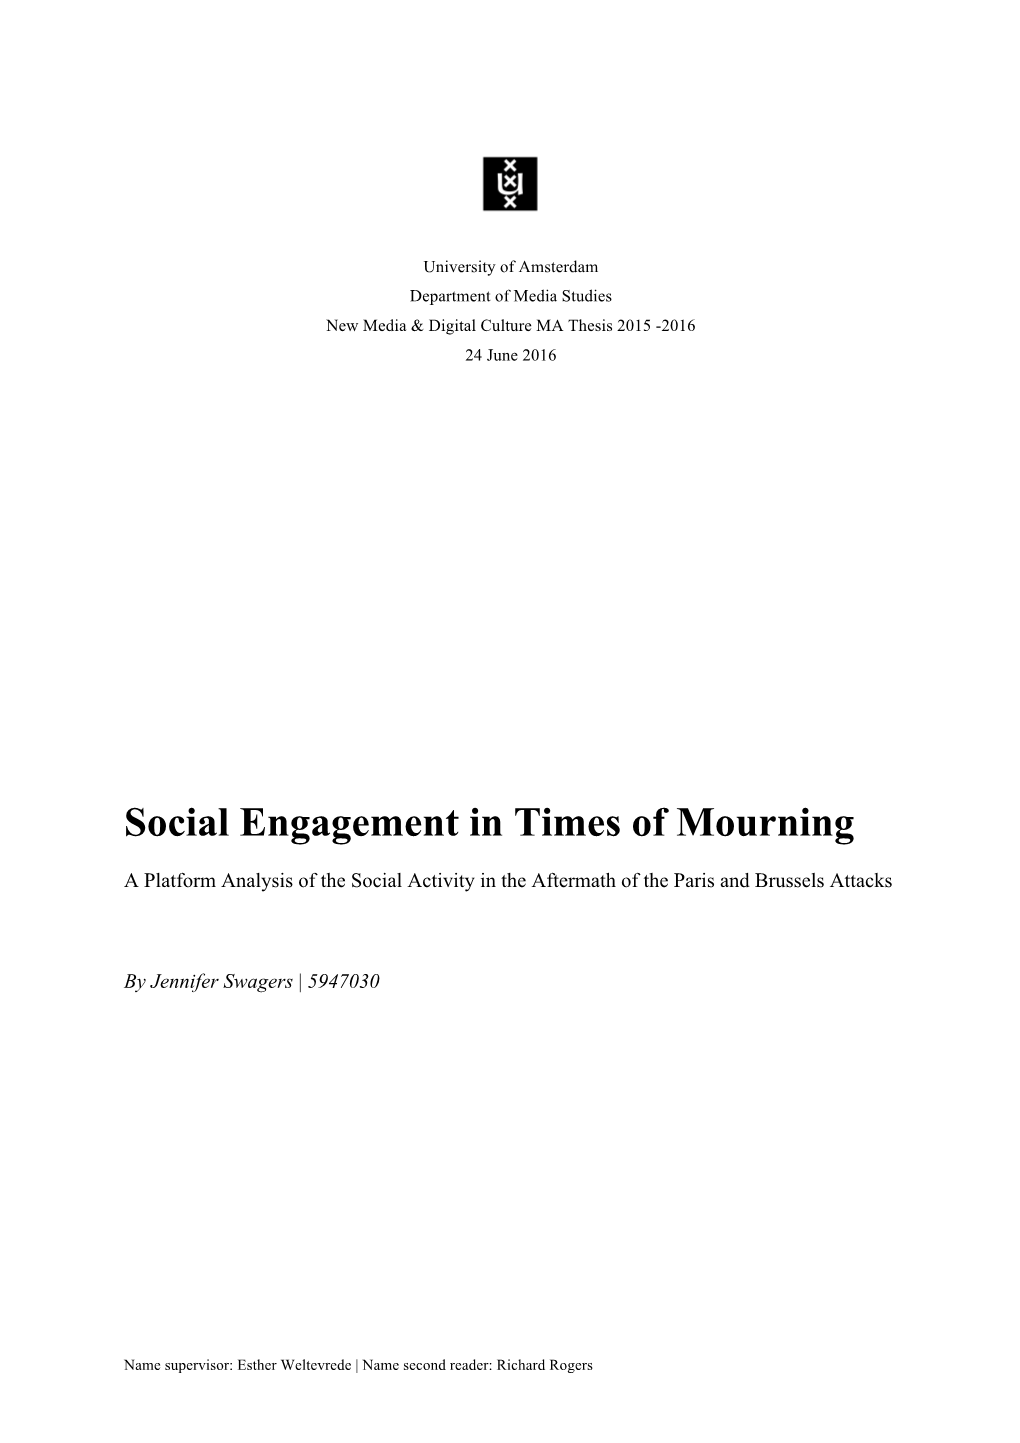 Social Engagement in Times of Mourning